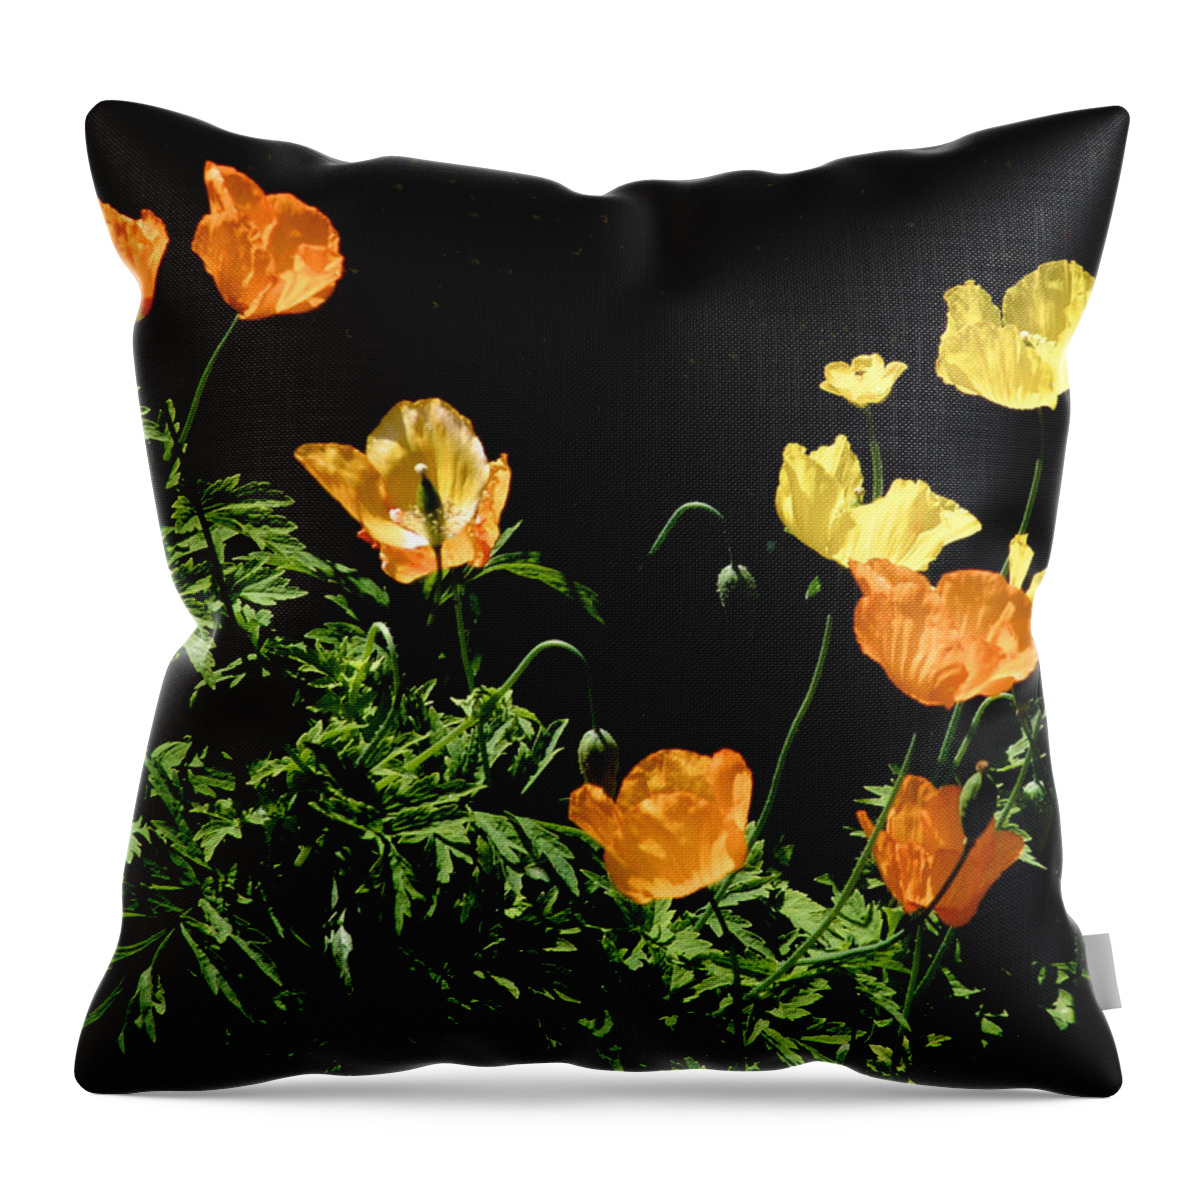 Poppy Throw Pillow featuring the photograph Poppies by Mark Egerton